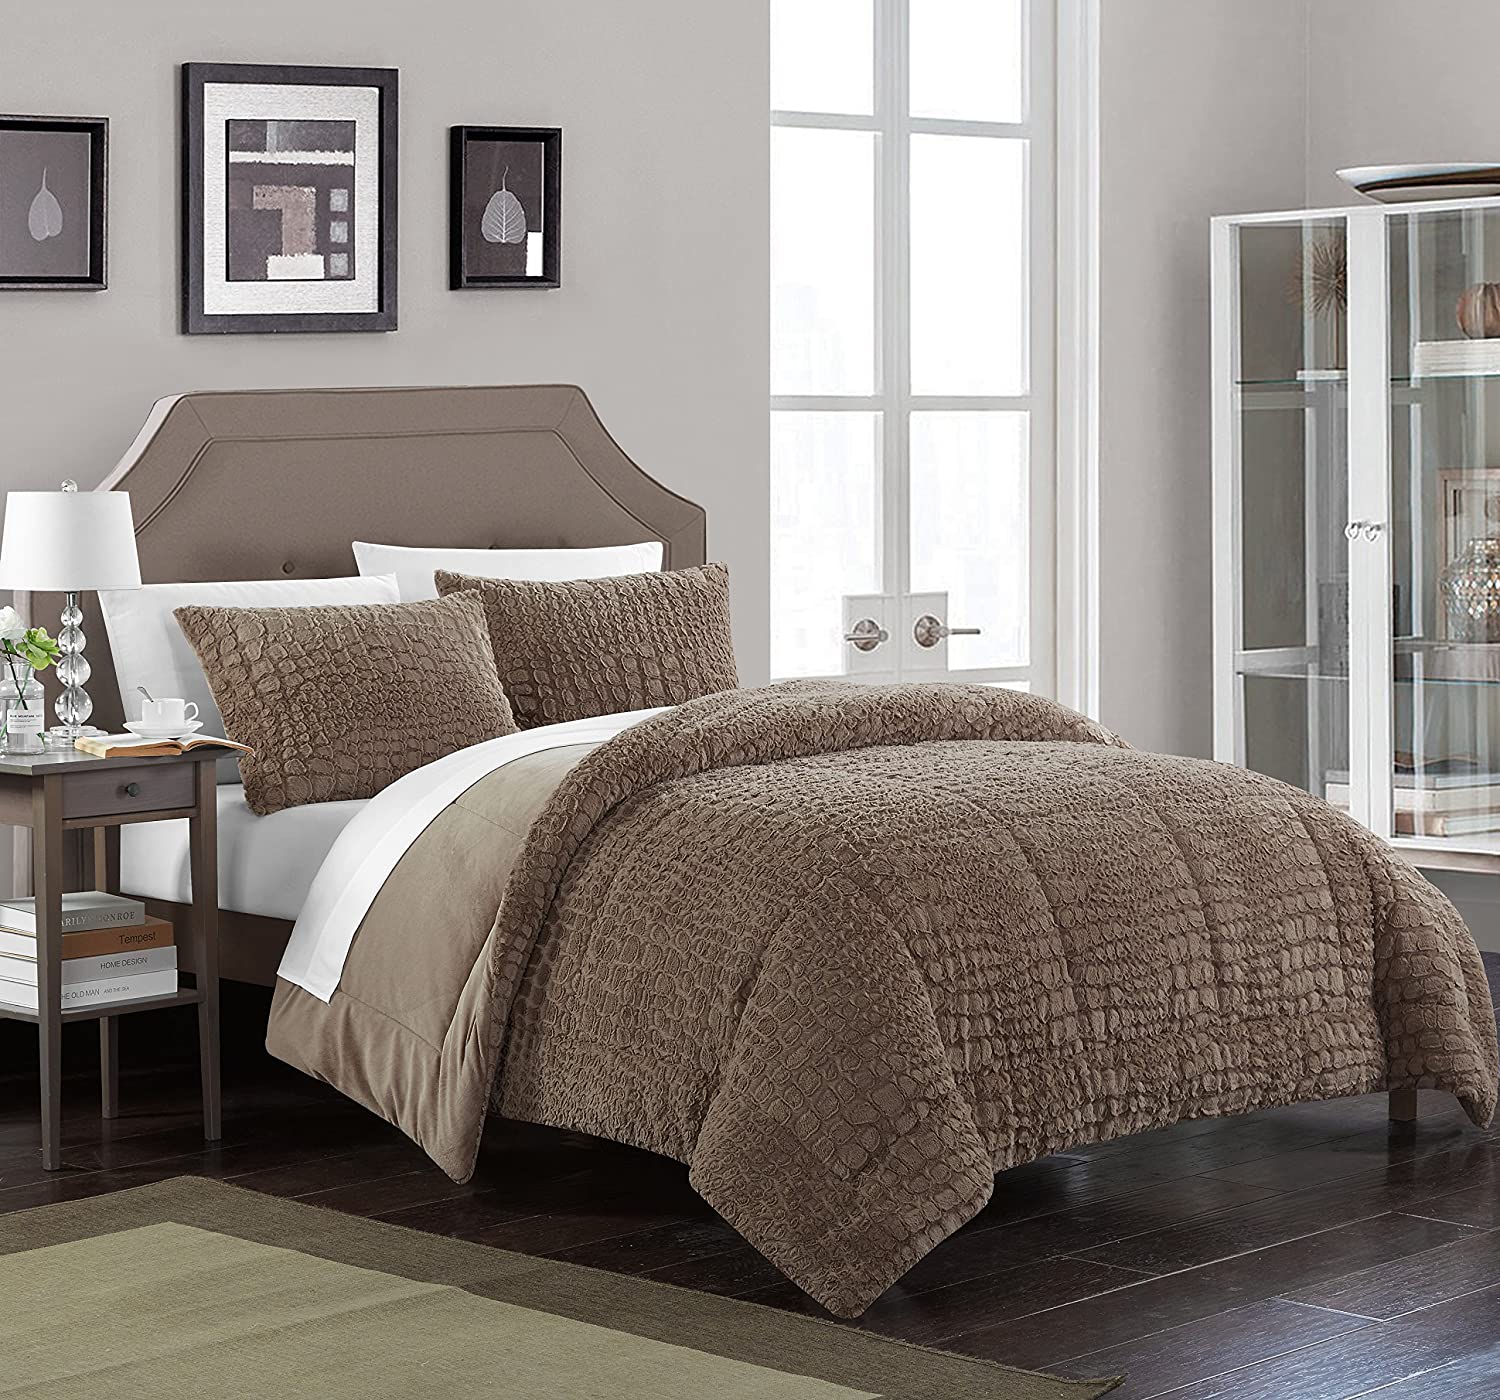 Details about   Chic Home 3 Piece New Faux Fur Collection with Mink Like Backing in Alligator An 